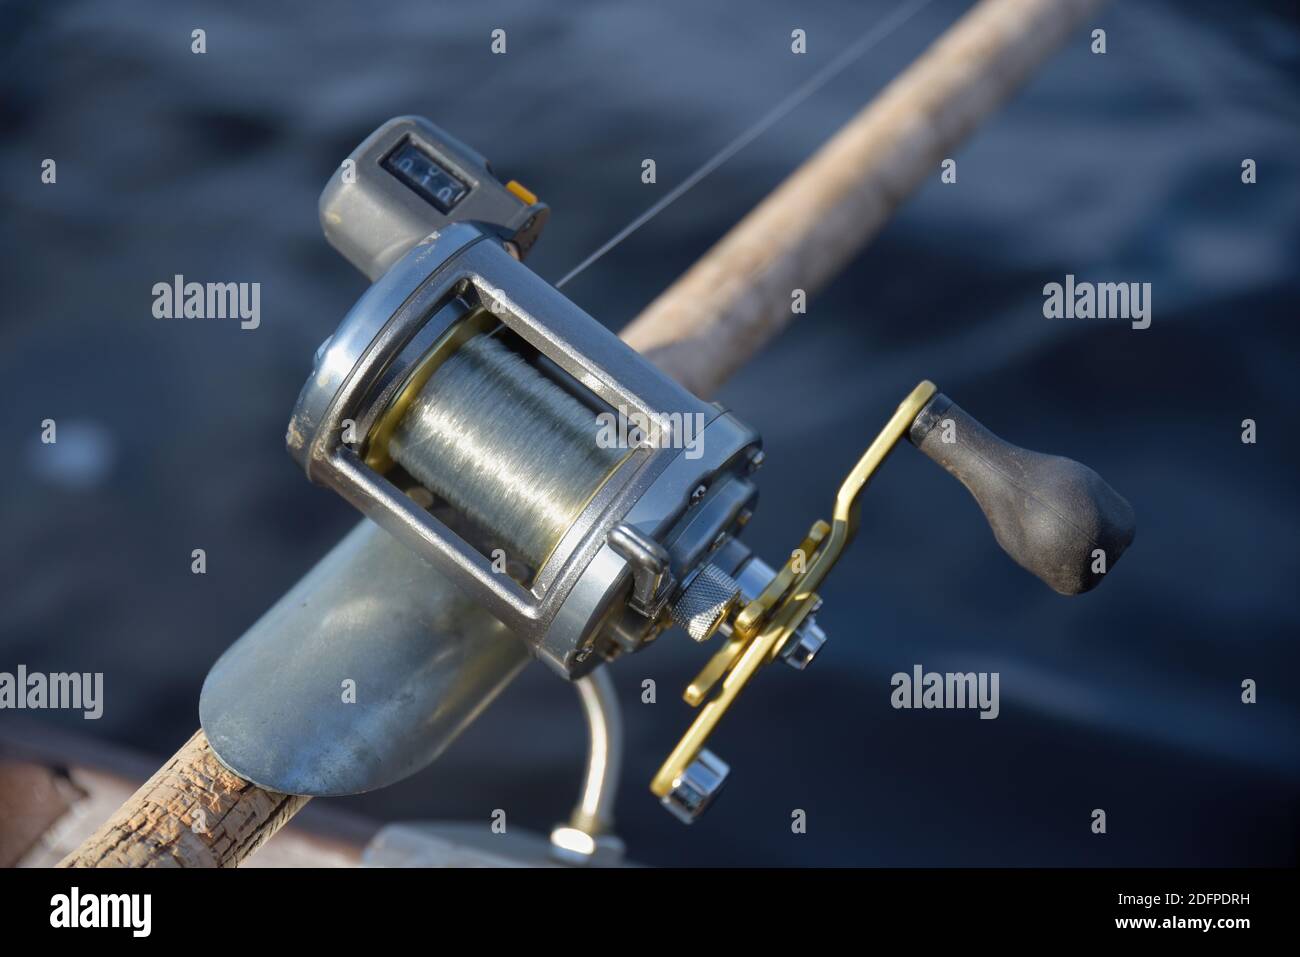 https://c8.alamy.com/comp/2DFPDRH/round-silver-fishing-reel-with-a-line-counter-indicating-almost-10-meters-fishing-line-out-place-in-a-rod-holder-with-blurred-river-water-background-2DFPDRH.jpg